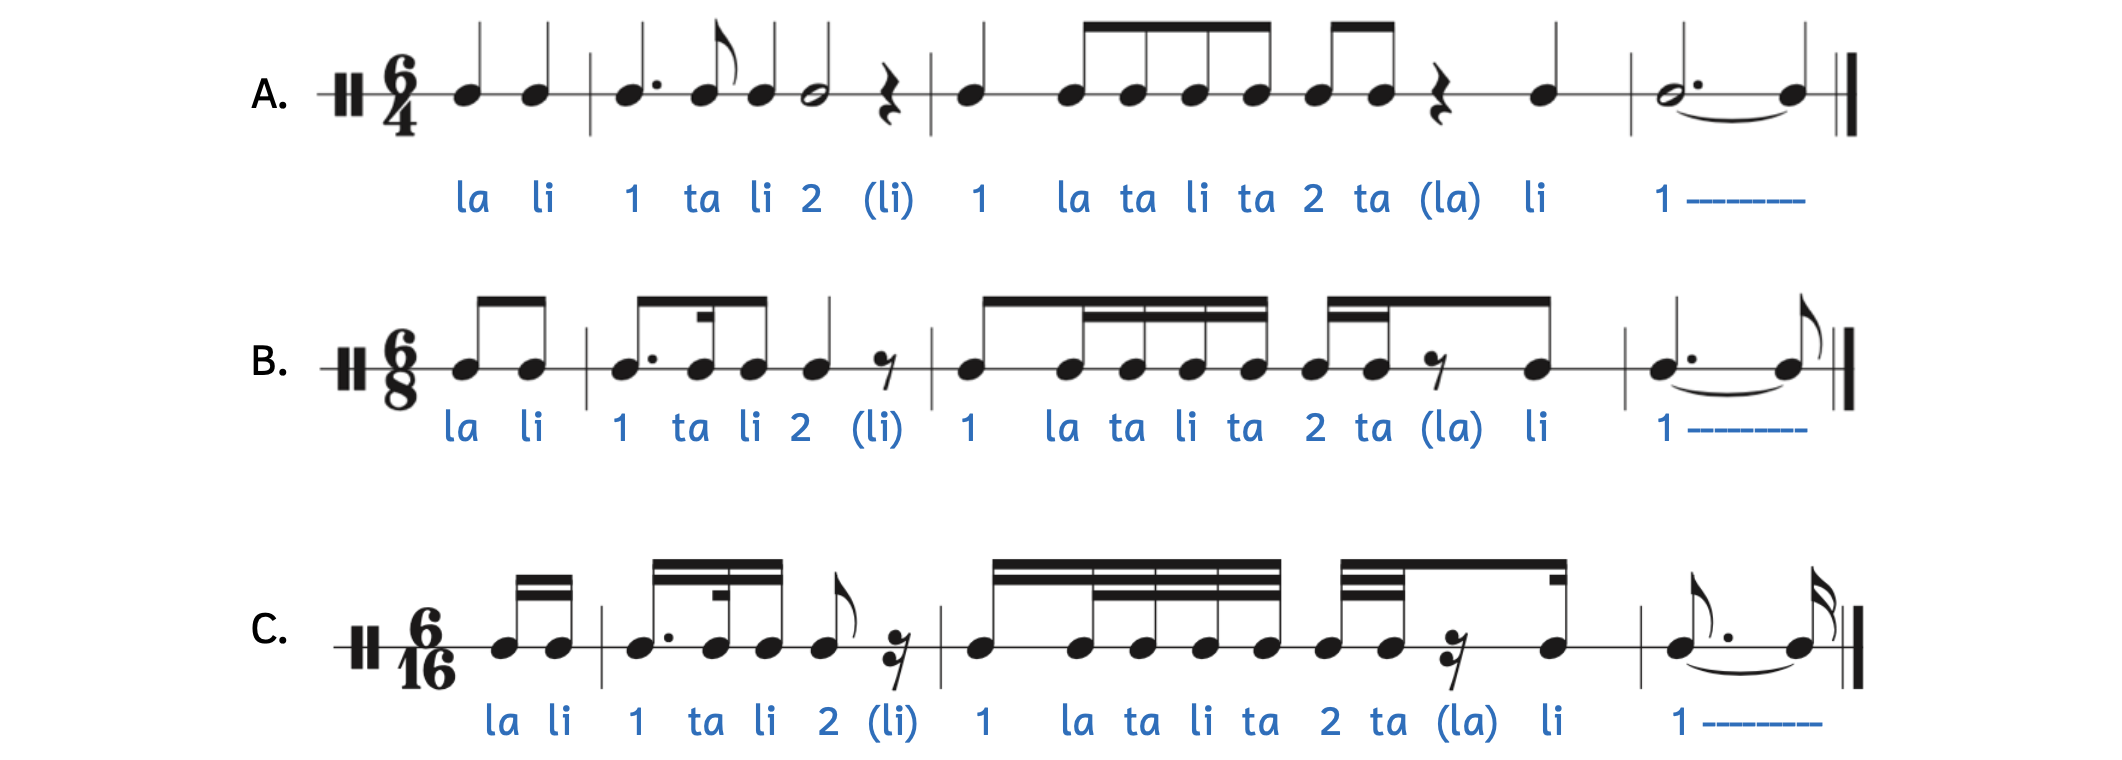 Example of rhythmic transposition for different compound meters. Example A is in 6-4. Example B is in 6-8. Example C is in 6-16. Listen to sound clip below.